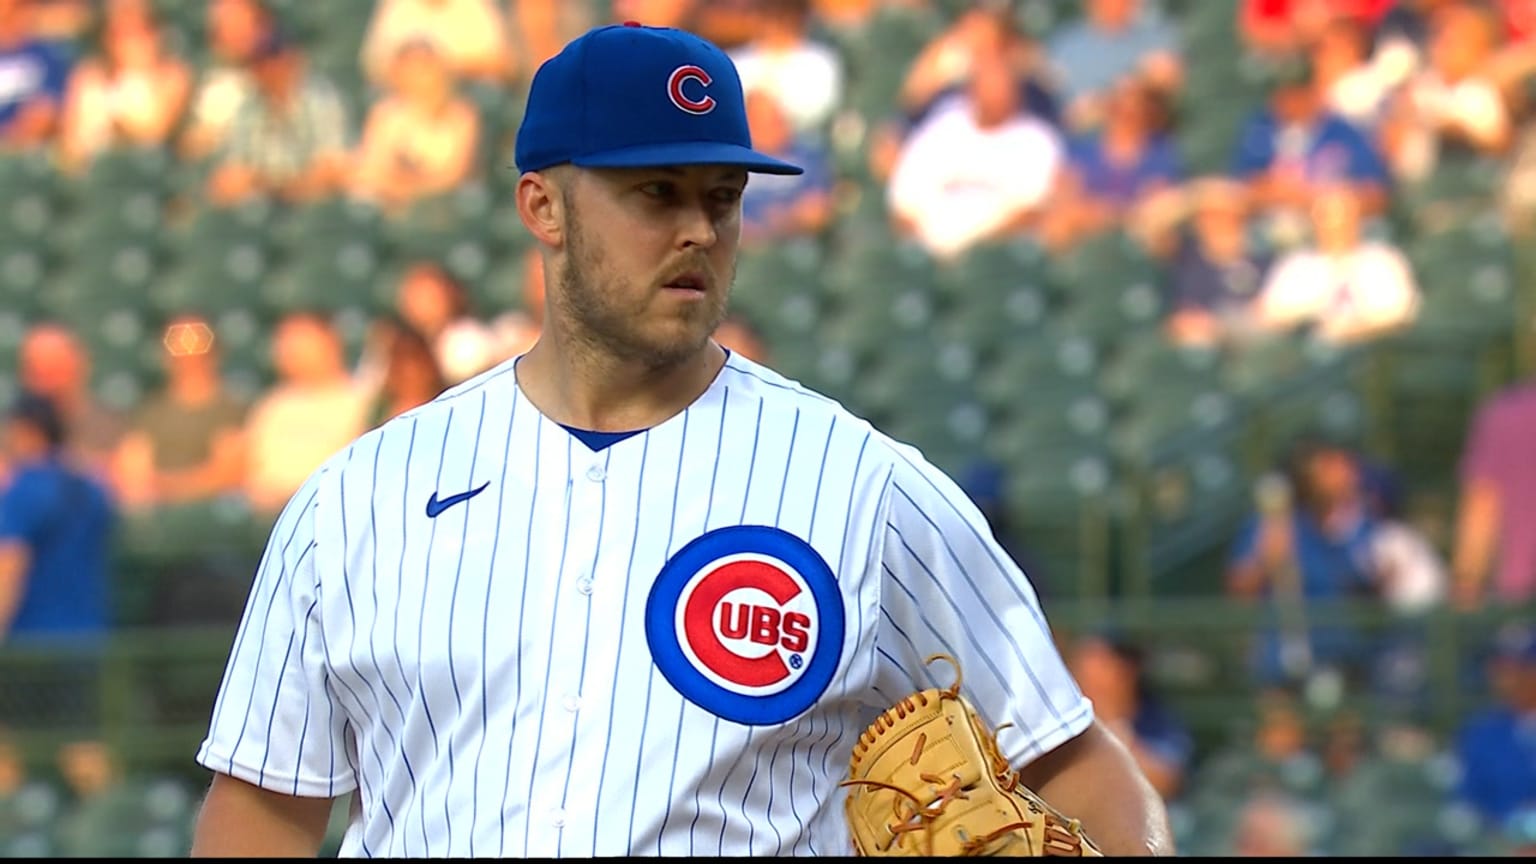 Jameson Taillon Strikes Out 7 in 5 Innings!, Chicago Cubs